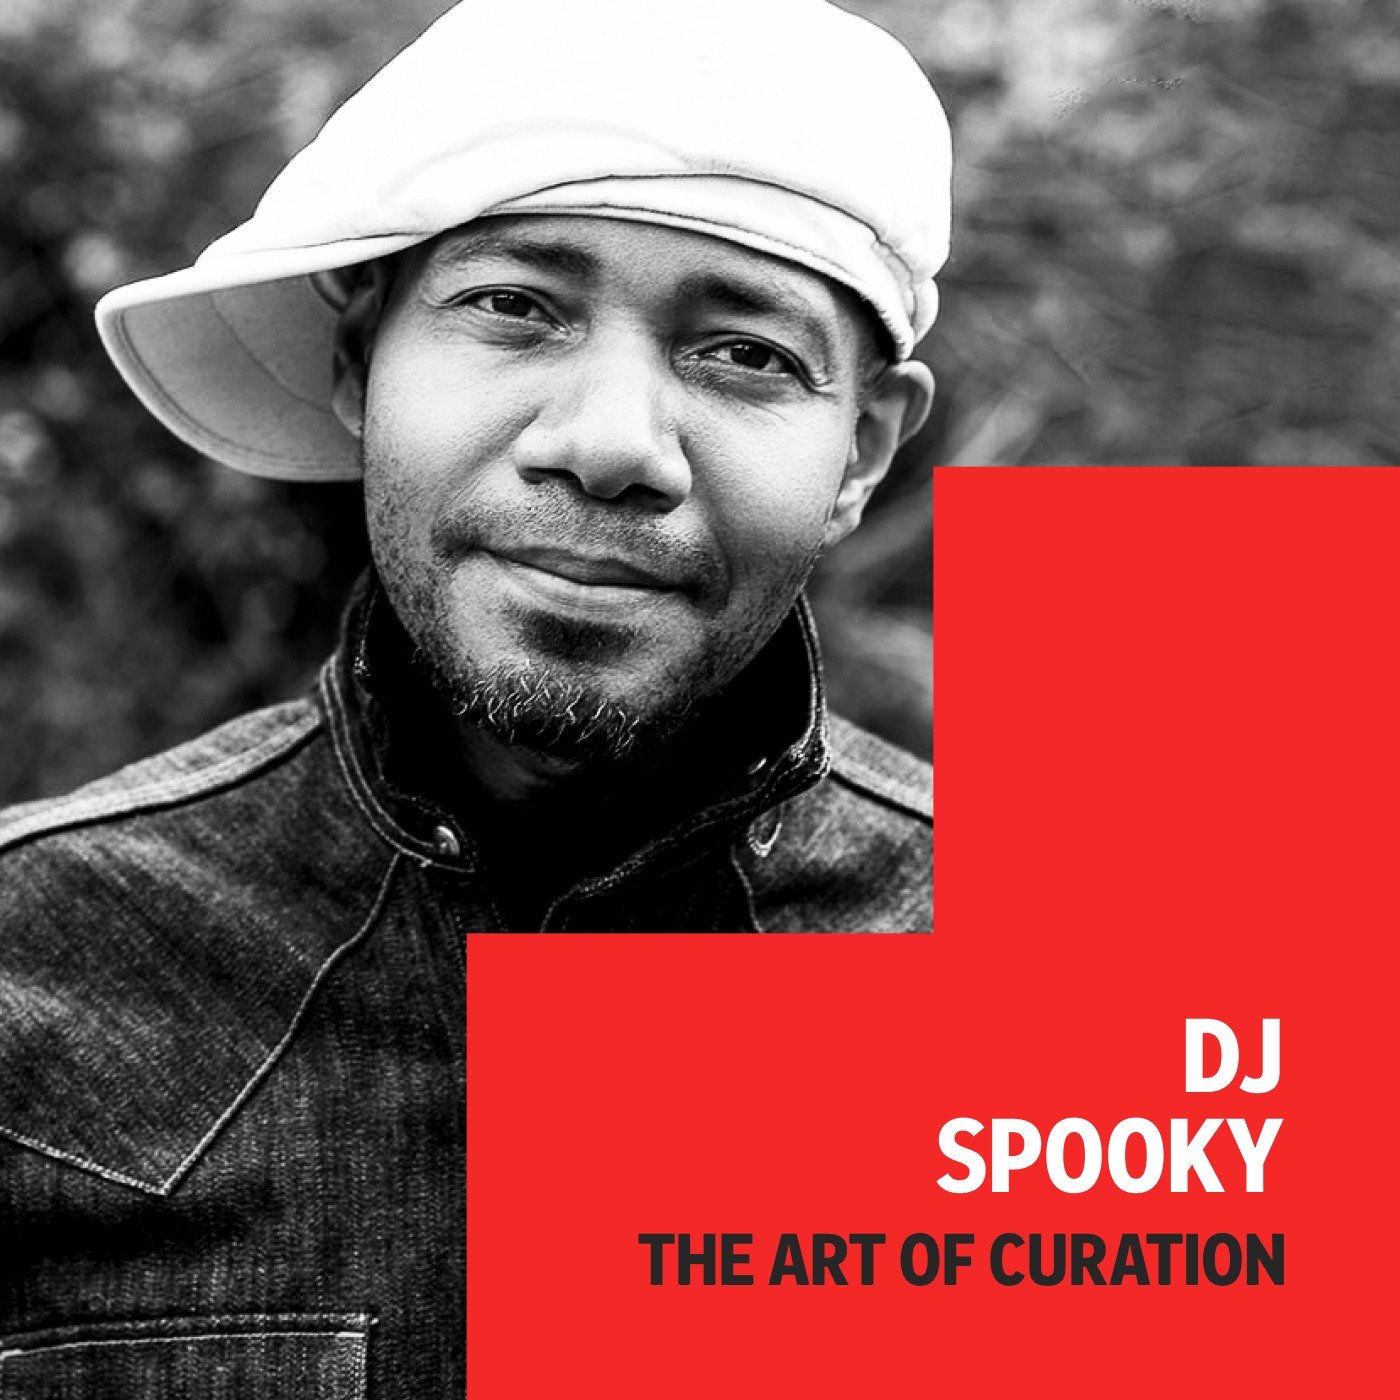 Curating an ‘information vaccine’ for these times 📰 DJ Spooky